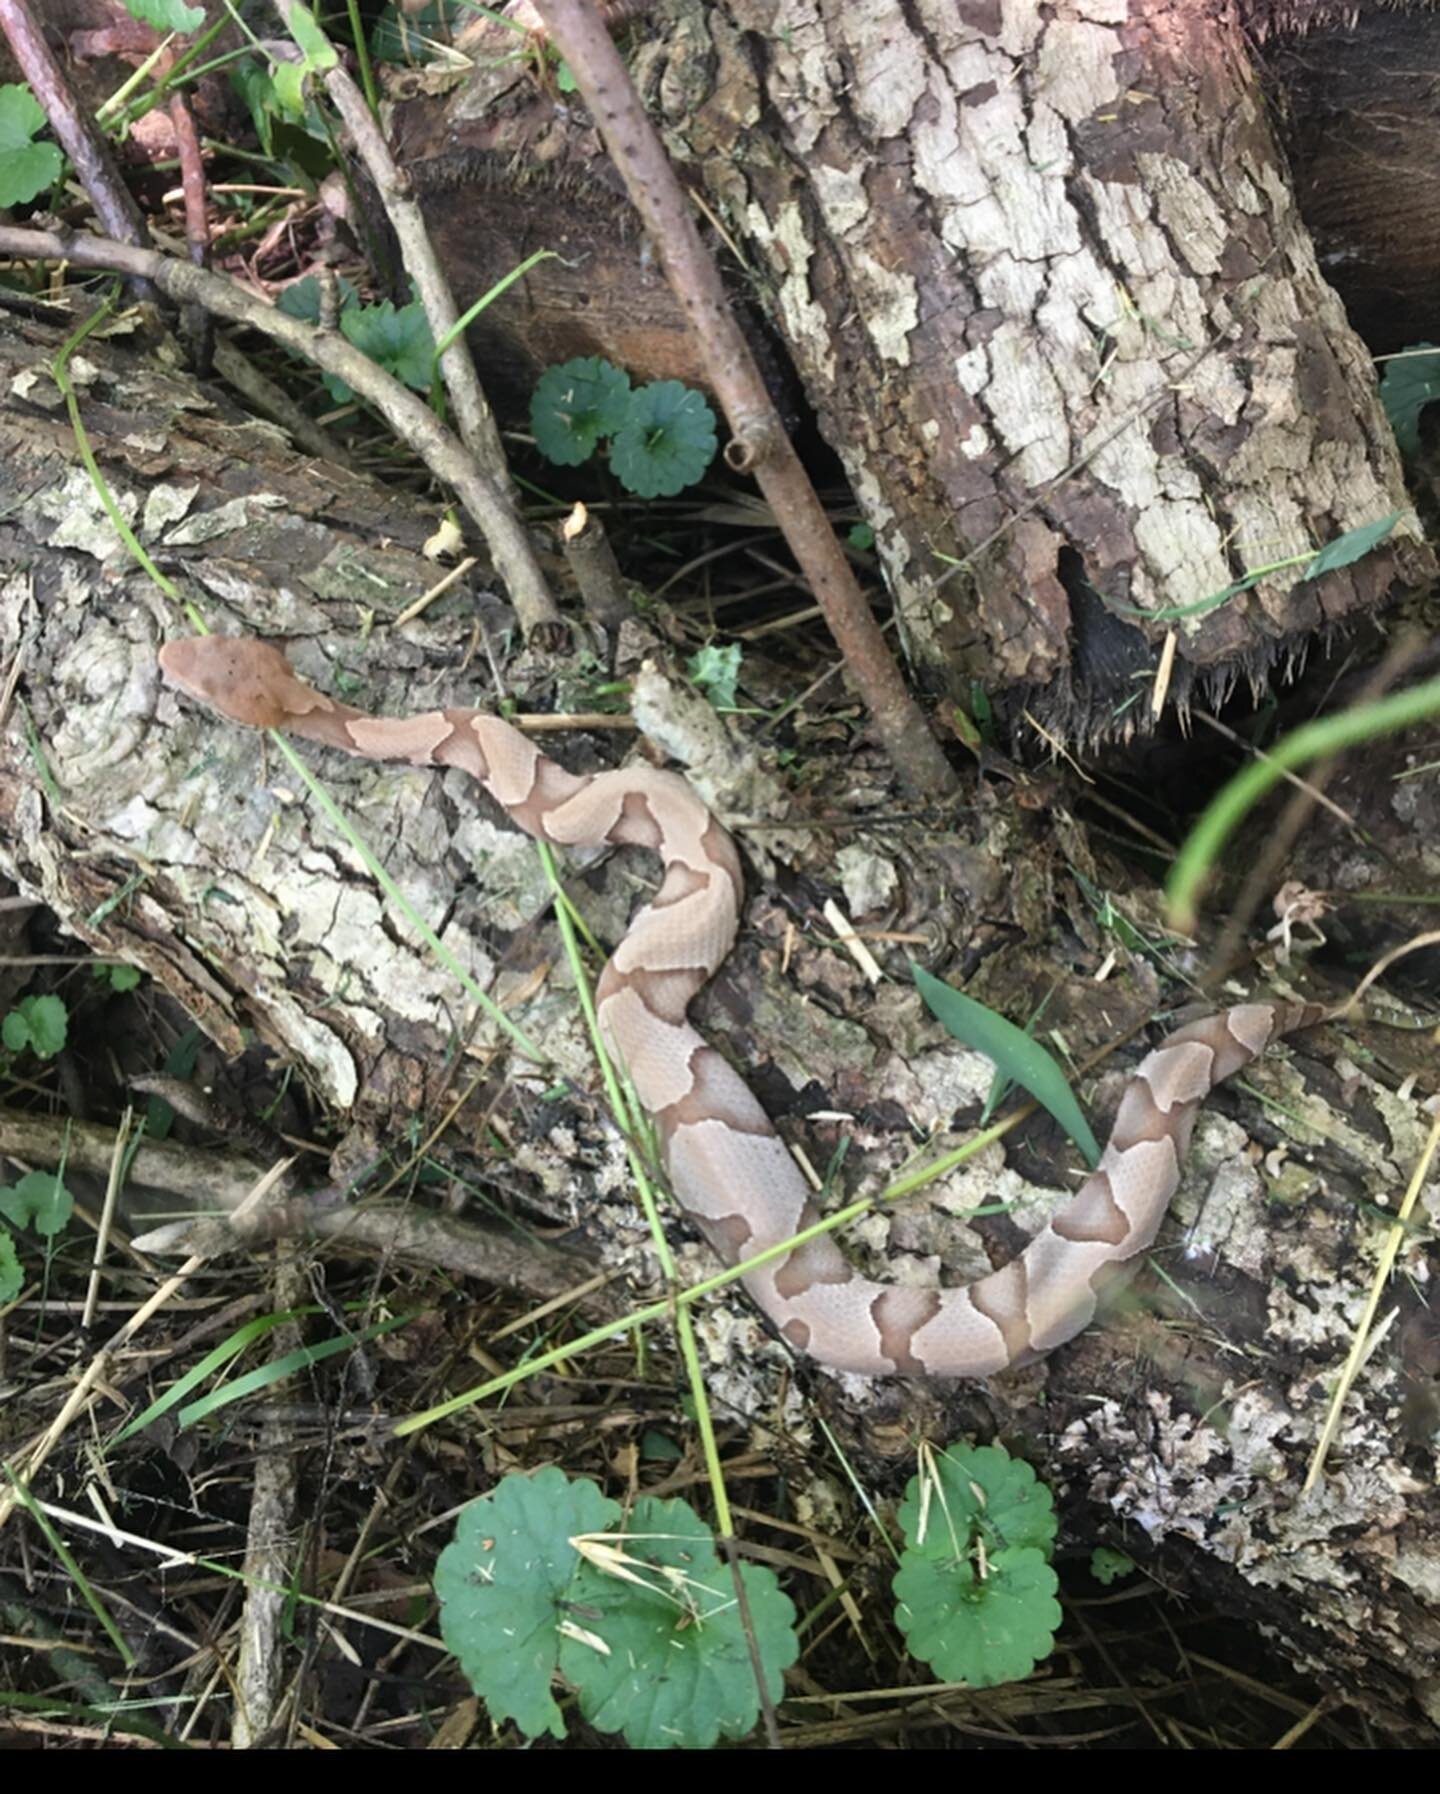 Wild Magnolia Land Trust snake sightings🐍

First picture is a Copperhead, then a Timber Rattlesnake. The Timber Rattlesnake is also known as the Velvet-Tailed Rattlesnake, Banded Rattlesnake, and Canebrake Rattlesnake. 

Snakes play an important rol